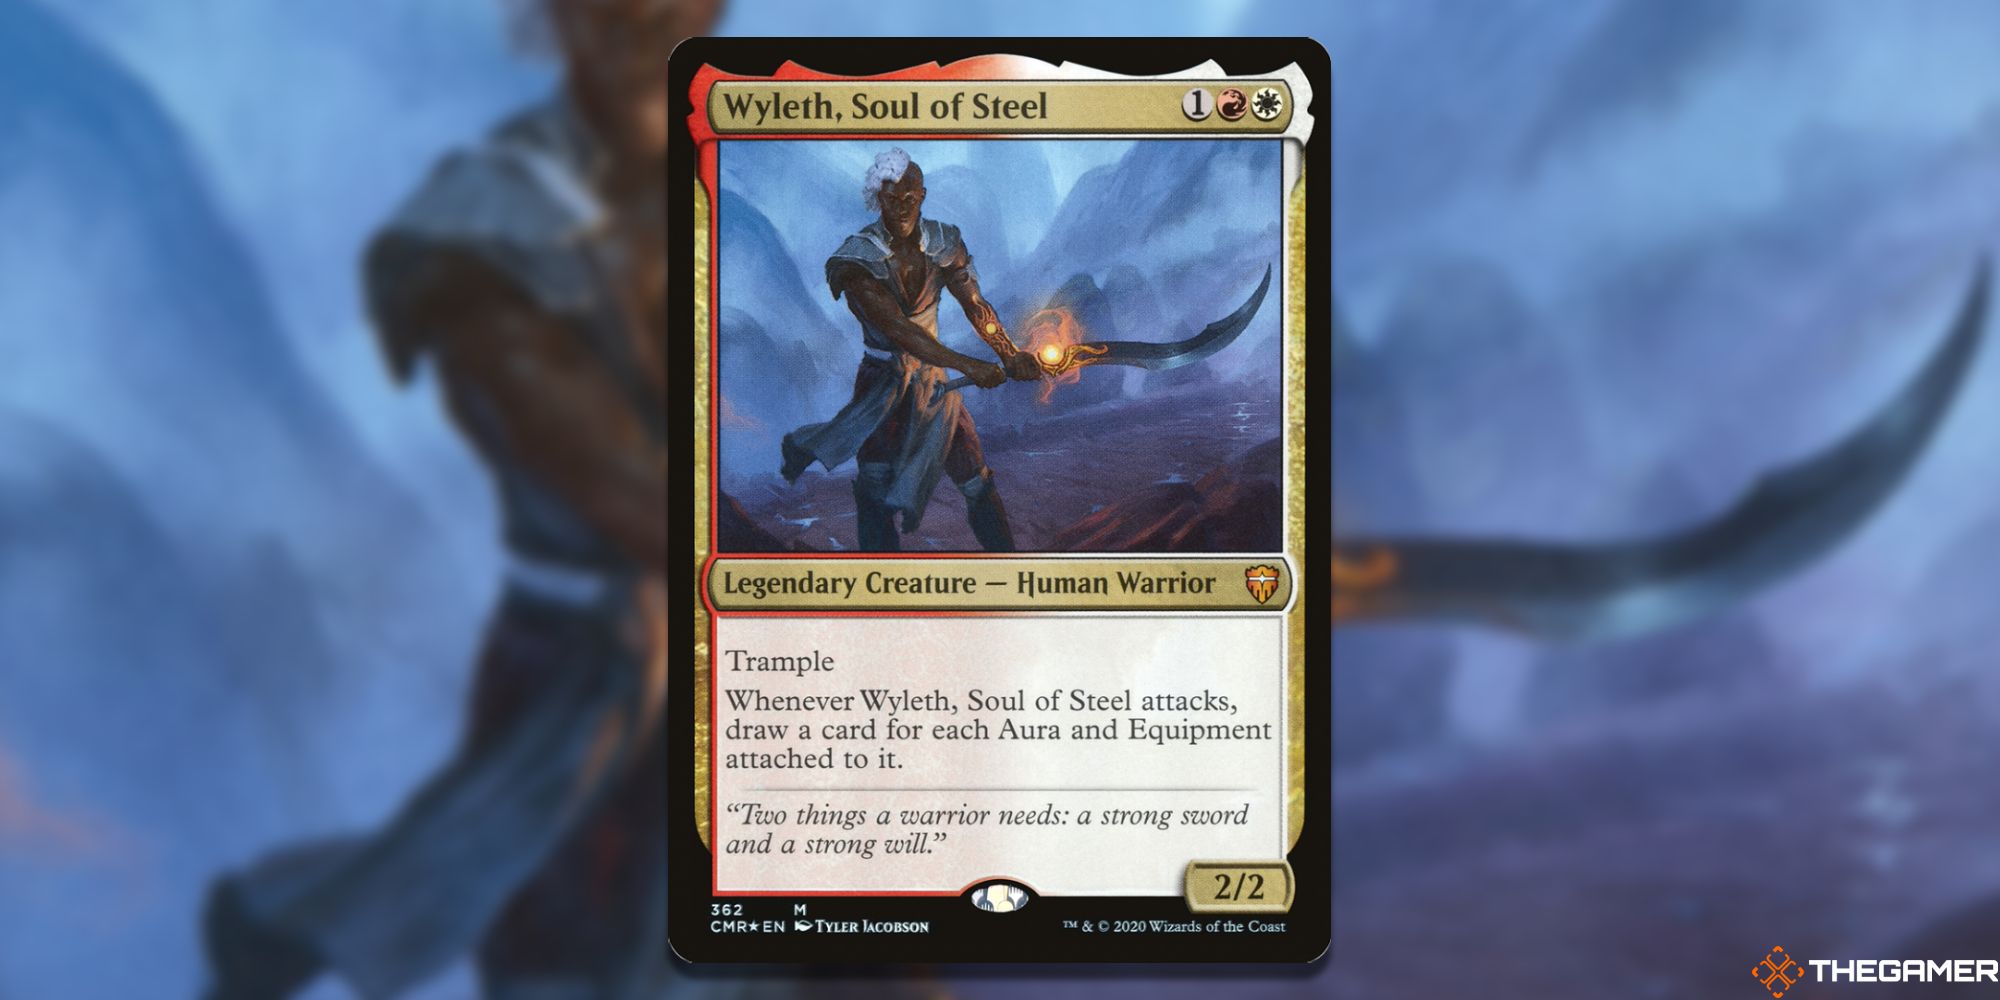 Image of the Wyleth, Soul of Steel card in Magic: The Gathering, with art by Tyler Jacobson